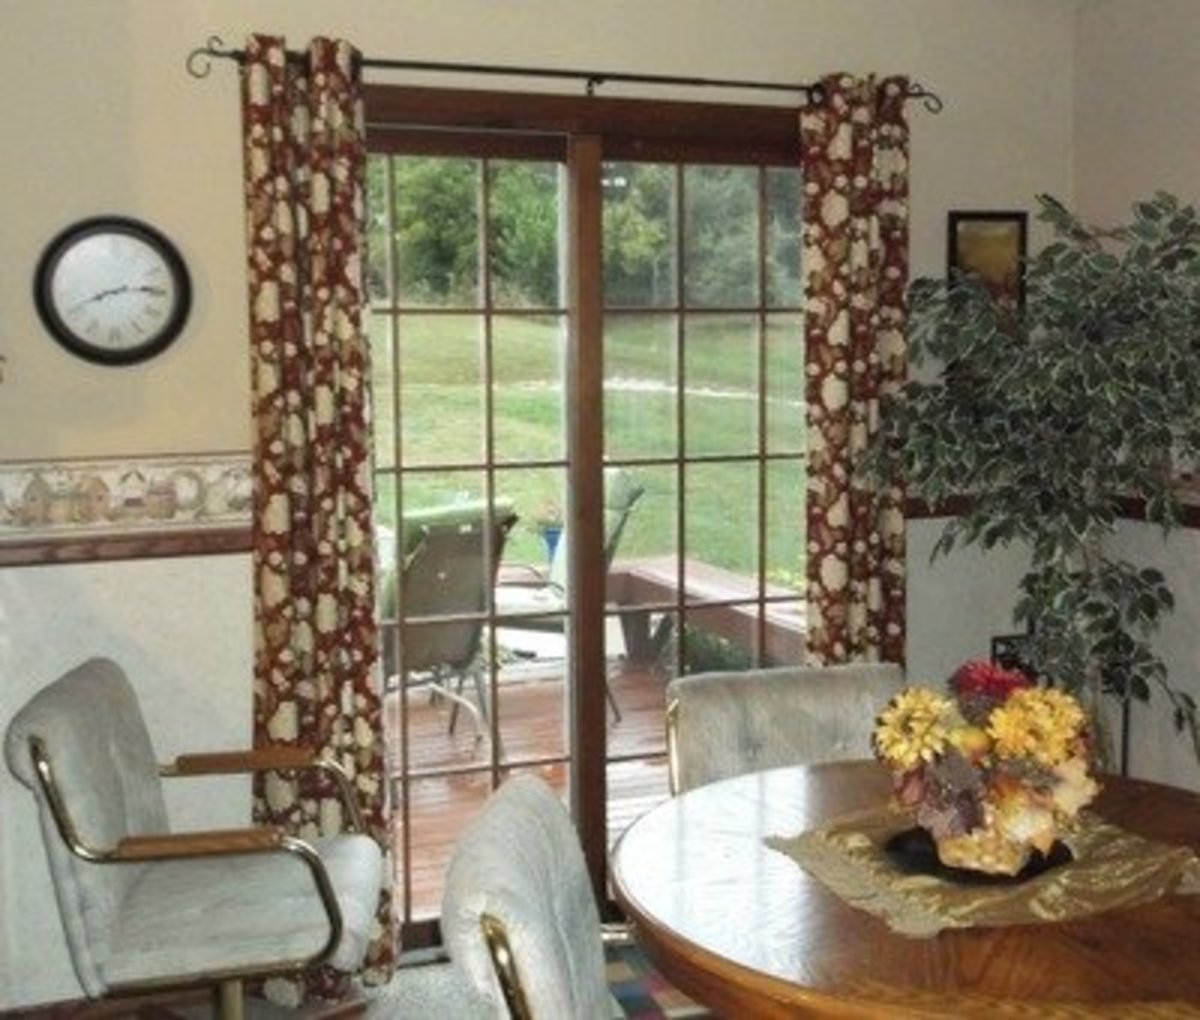 Here's another grommet pattern. These curtains flow so smoothly on the rod!